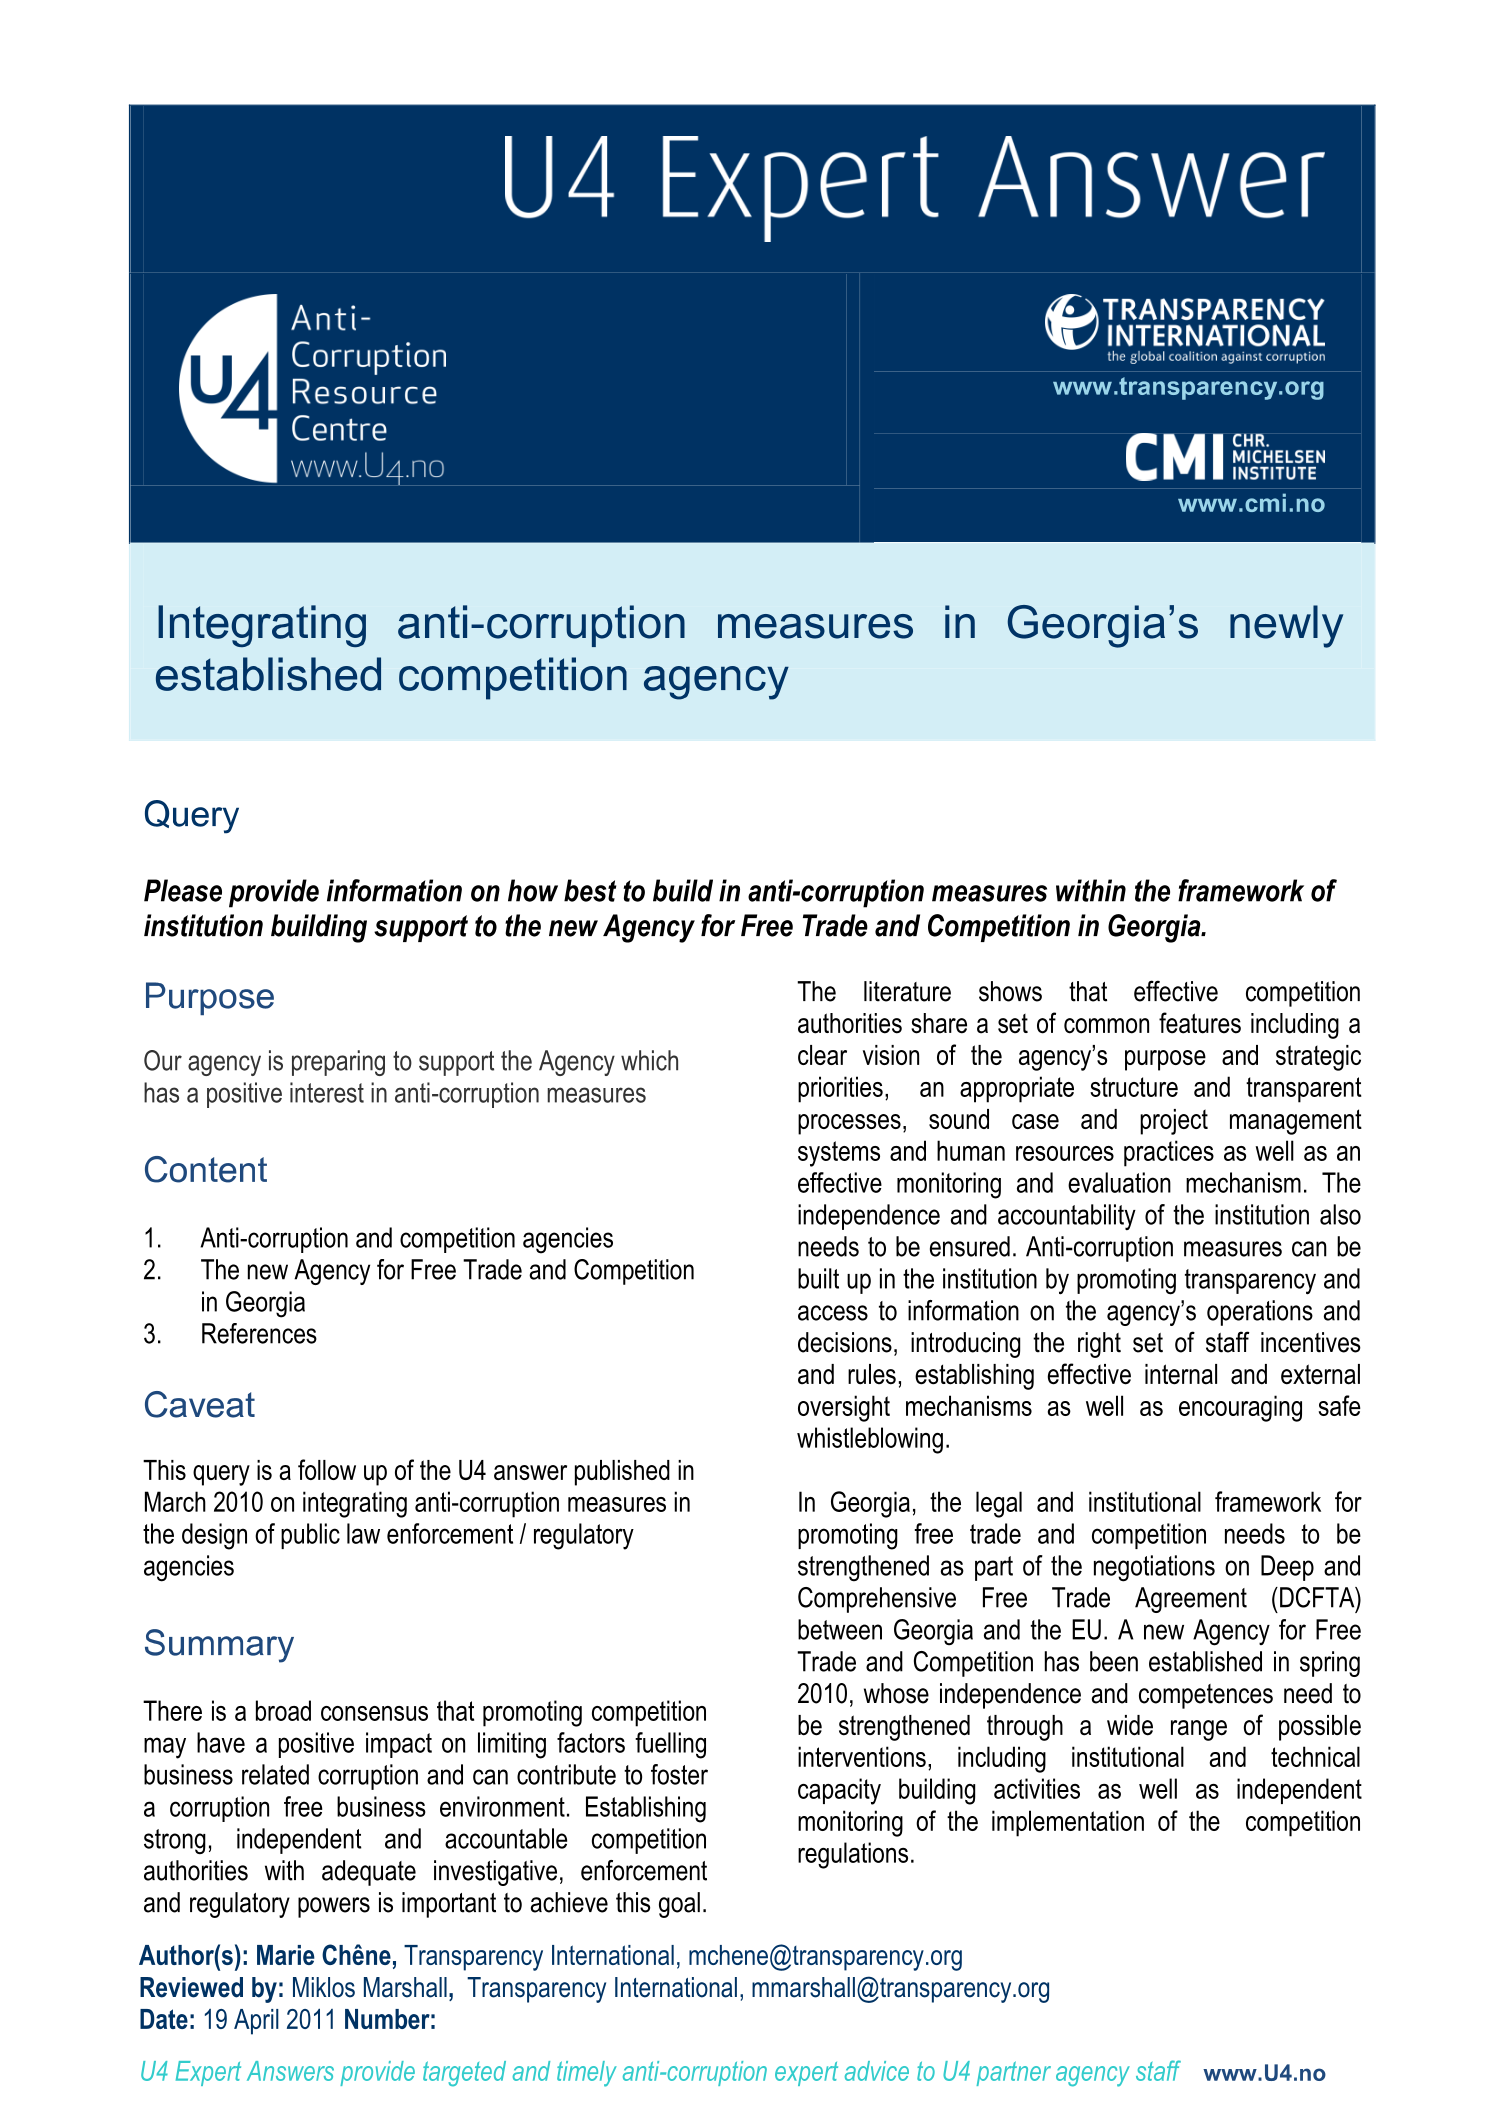 Integrating anti-corruption measures in Georgia’s newly established competition agency